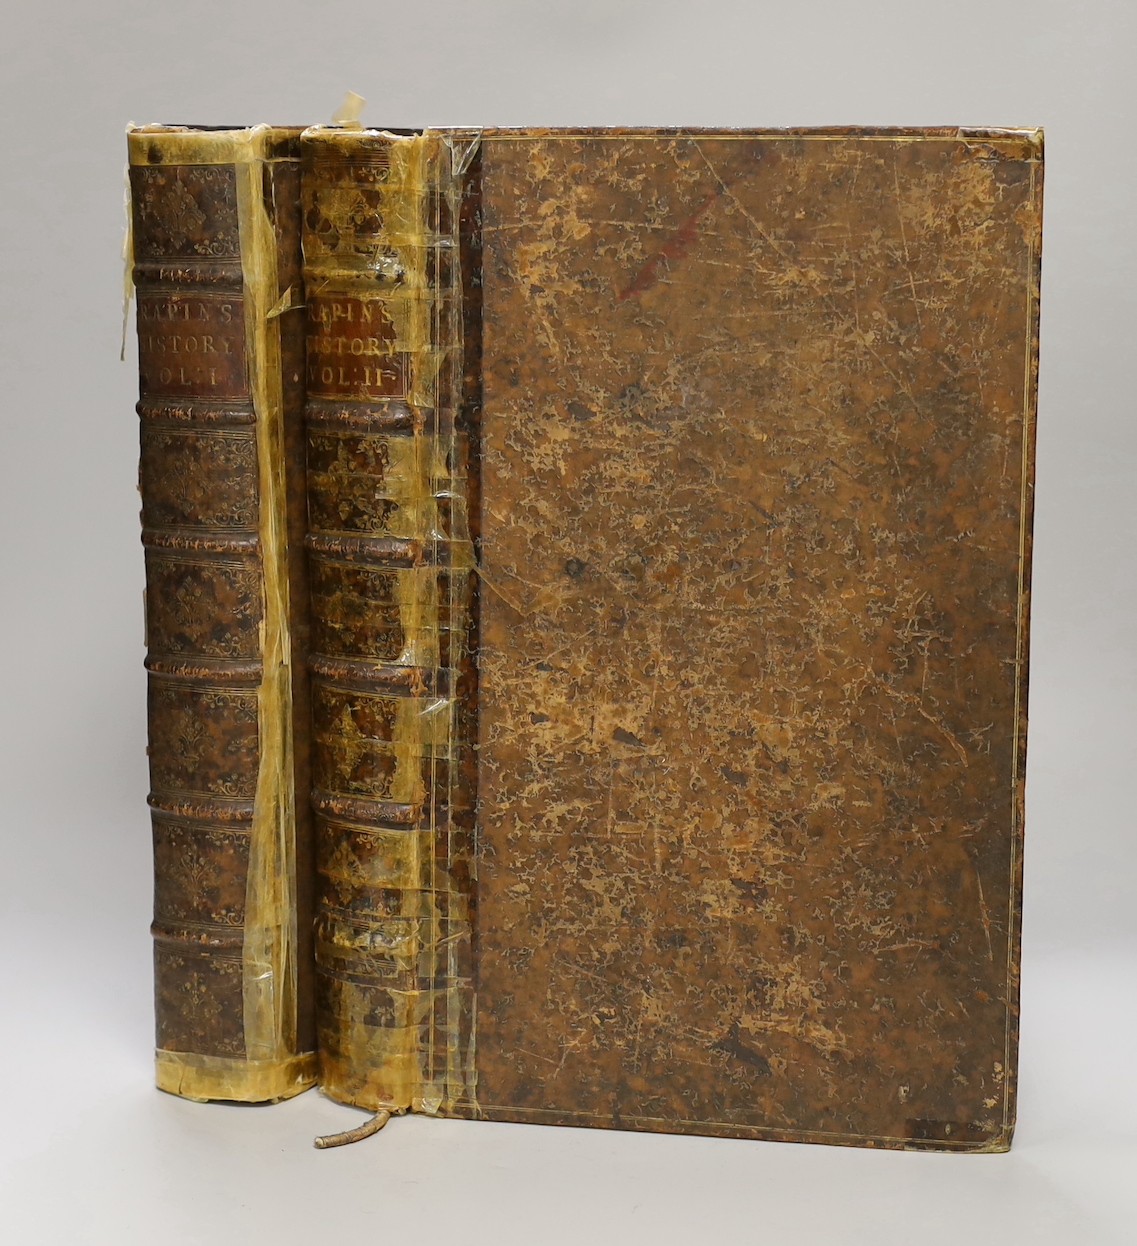 Two volumes of The History of England